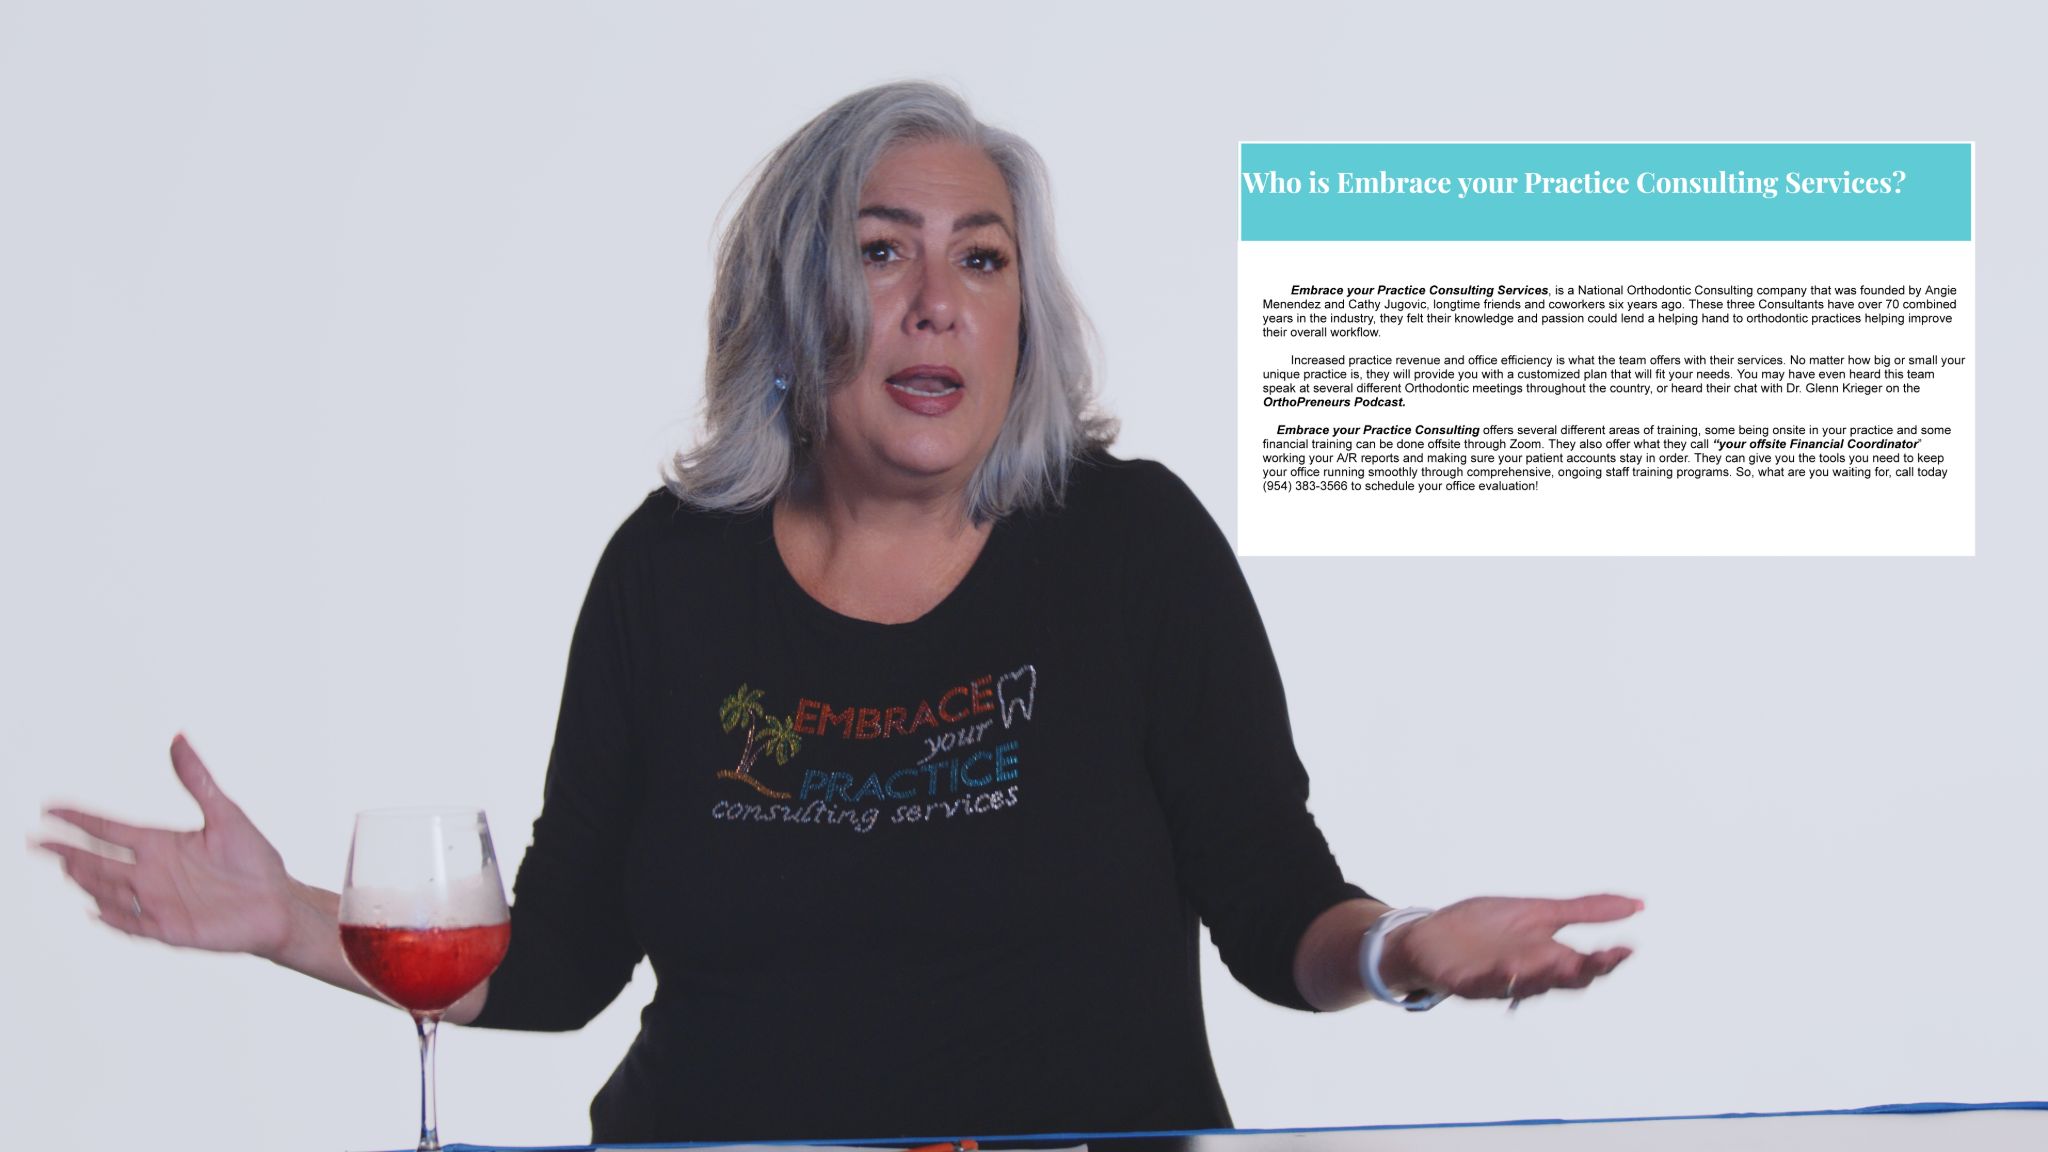 Woman with gray hair talking wearing black shirt with colorful logo with a glass of red wine nearby and Who Is Embrace Your Practice Consulting Services insert